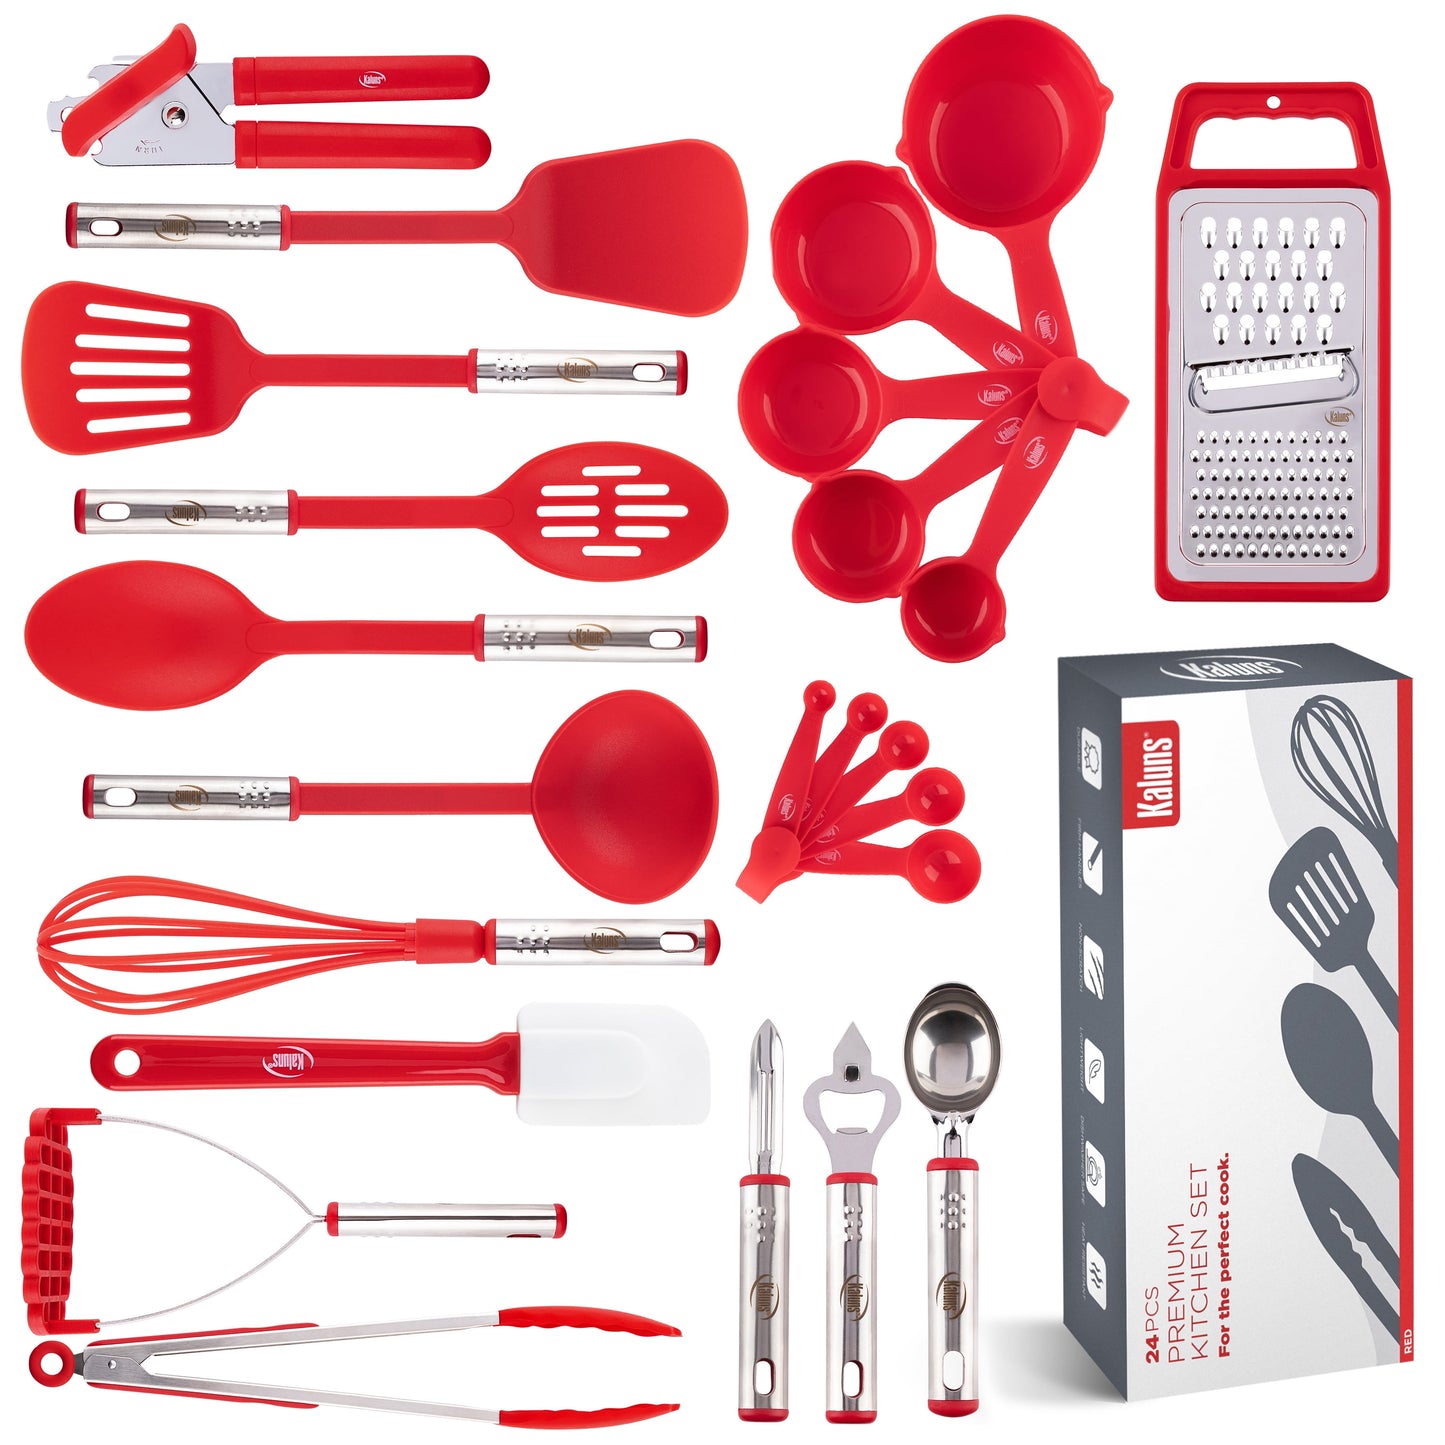 Kaluns 35pc Nylon and Stainless Steel Kitchen Utensils Set for Cooking Household Essentials